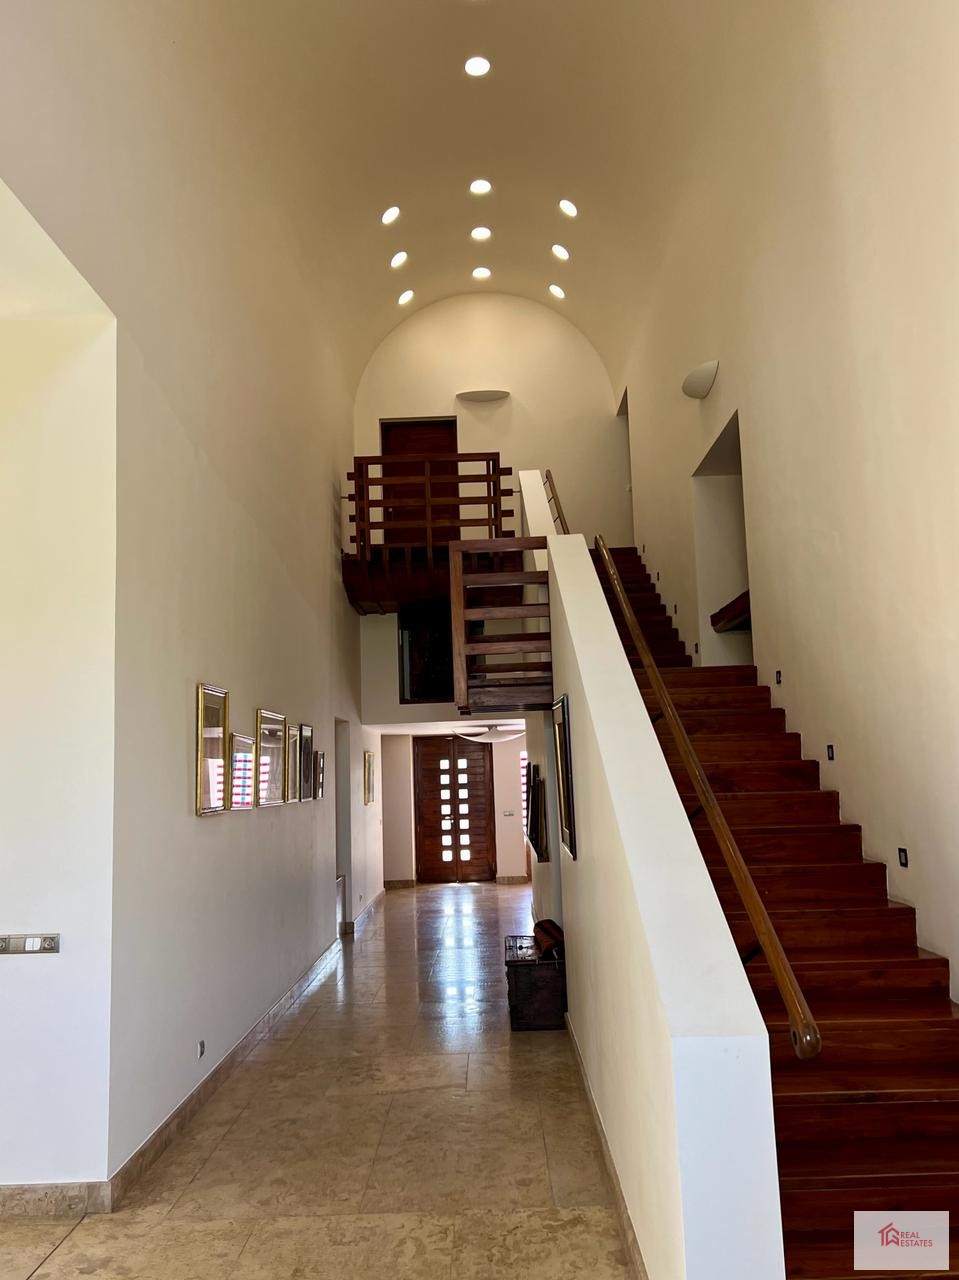 Villa rent panorama view pyramid Cairo Alex road This beautiful villa overlooks the Pyramids of Giza . Situated on the Cairo-Alexandria desert road with easy access to sheikh Zayed and Zamalek